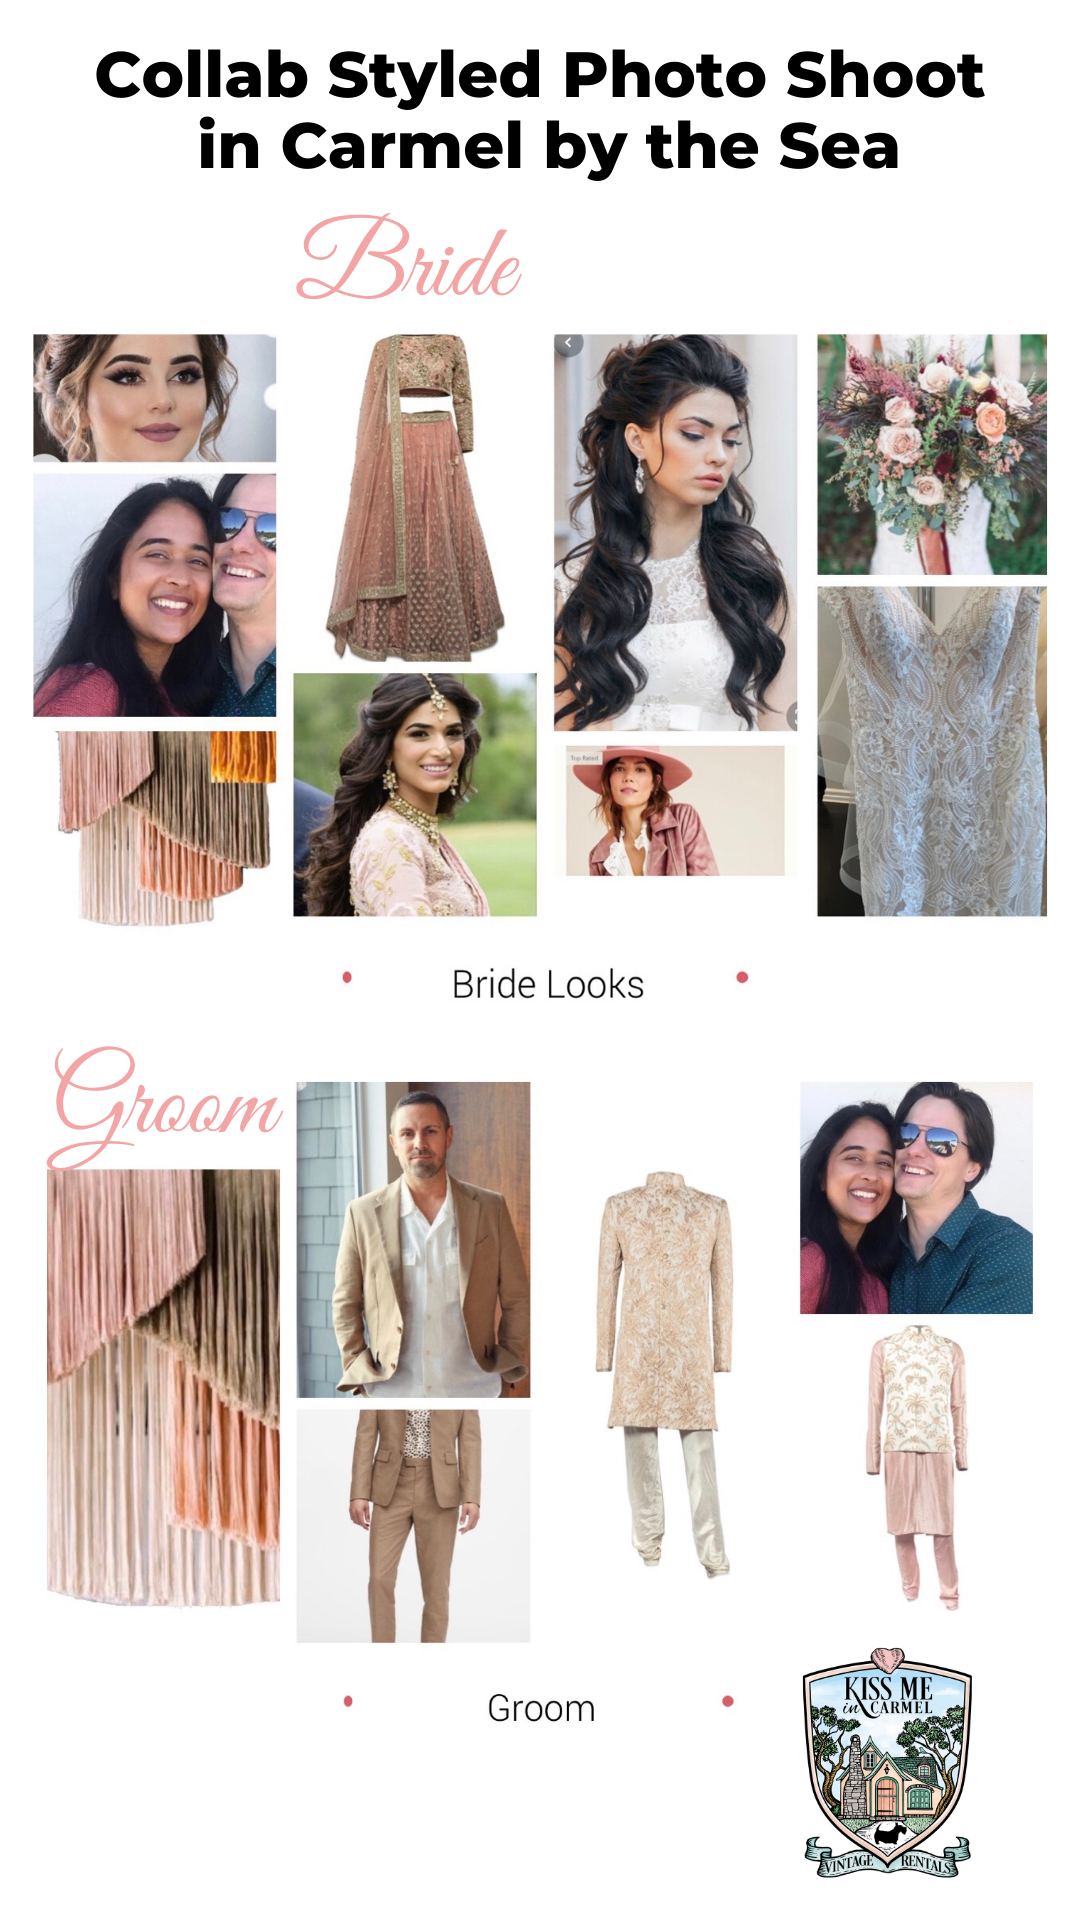 Collab Photo shoot bride groom inspo boards.png